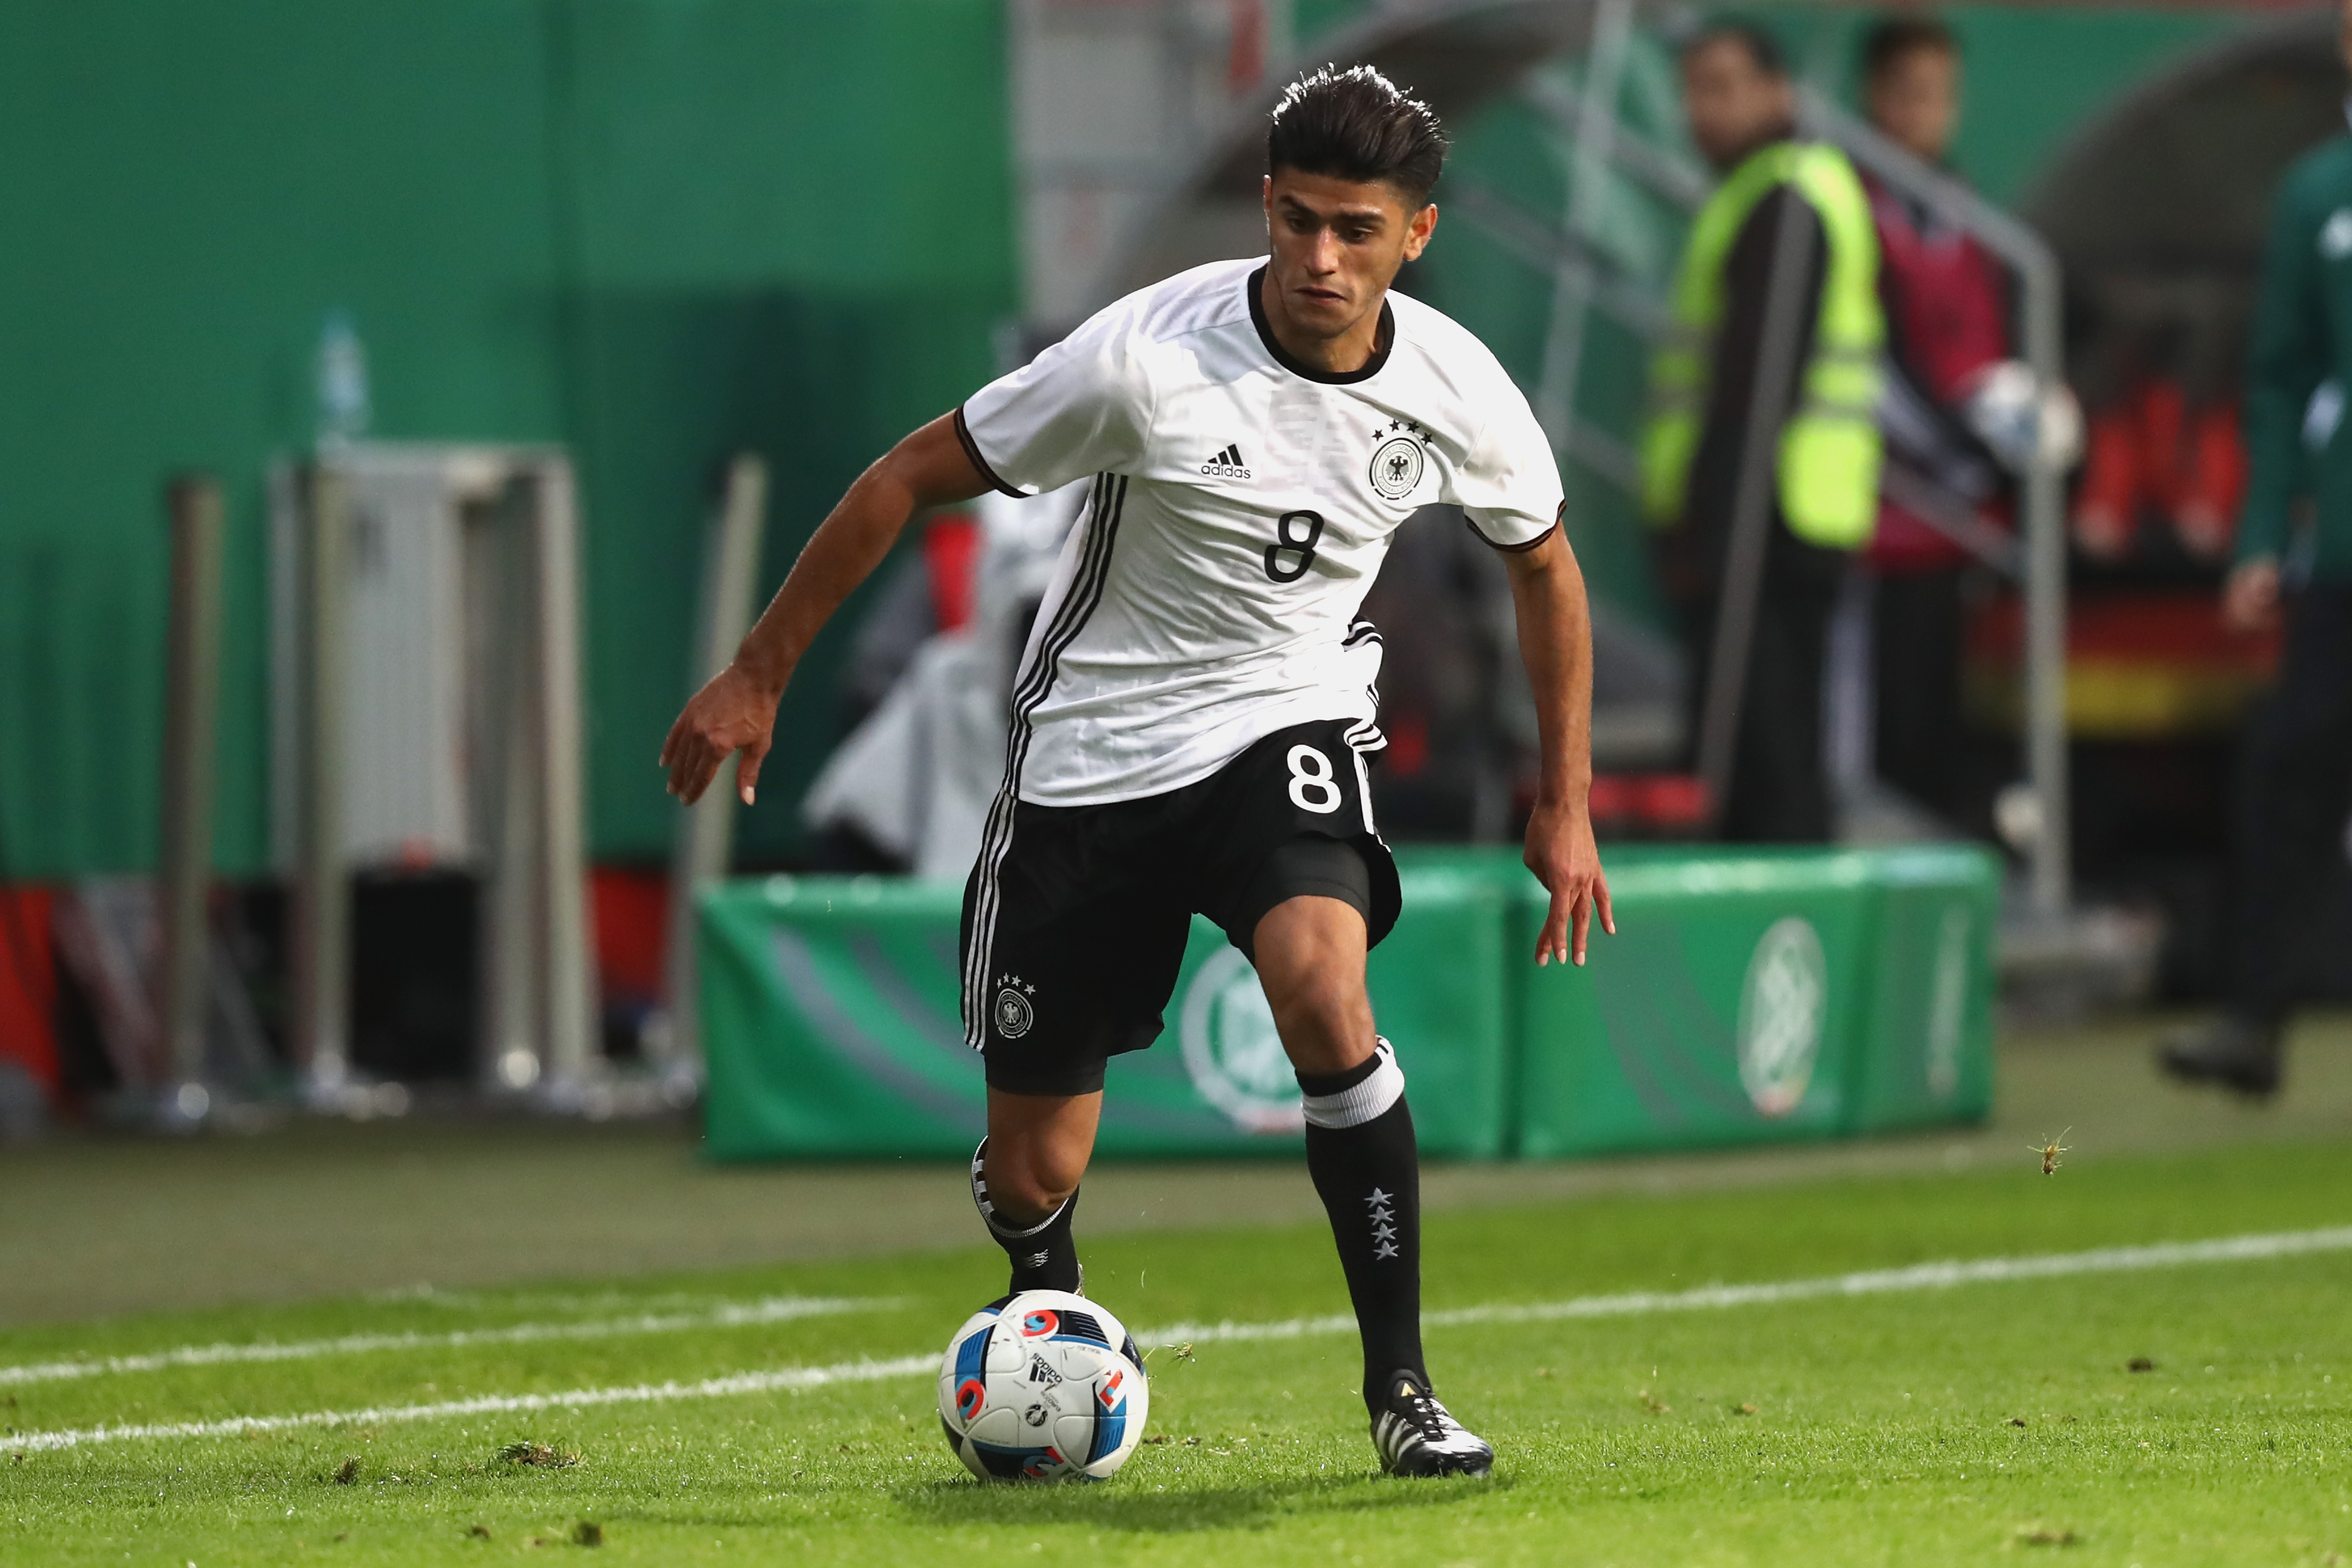 INGOLSTADT, GERMANY - OCTOBER 07:  Mahmoud Dahoud of Germany runs with the ball during the 2017 UEFA European U21 Championships Qualifier between Germany and Russia at Audi Sportpark on October 7, 2016 in Ingolstadt, Germany.  (Photo by Alexander Hassenstein/Bongarts/Getty Images)